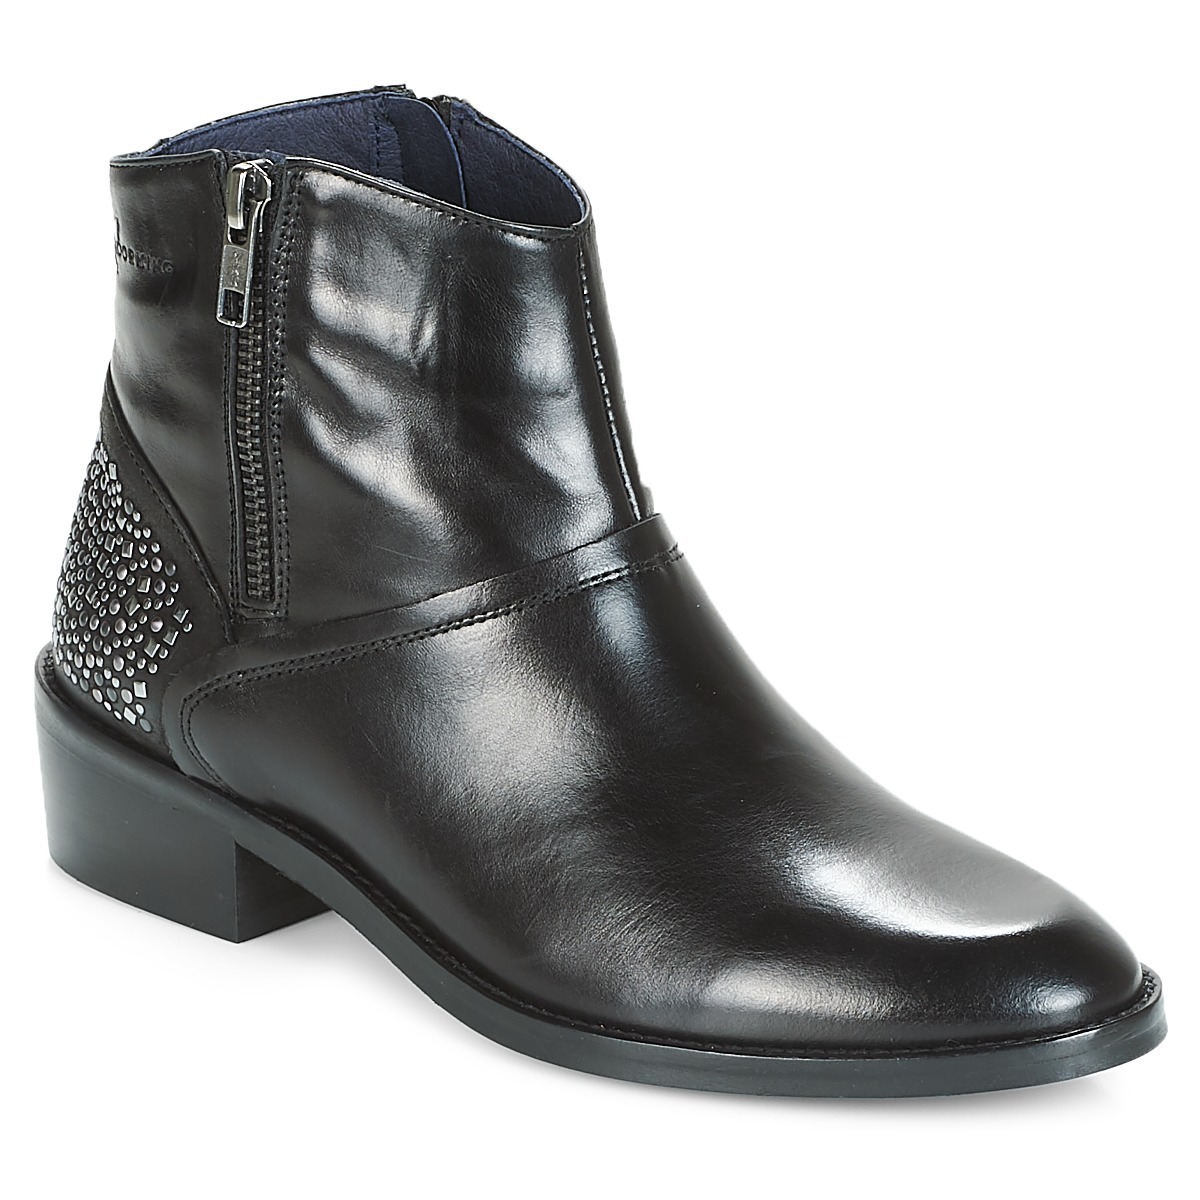 Dorking - Boots Black for Women by Spartoo GOOFASH